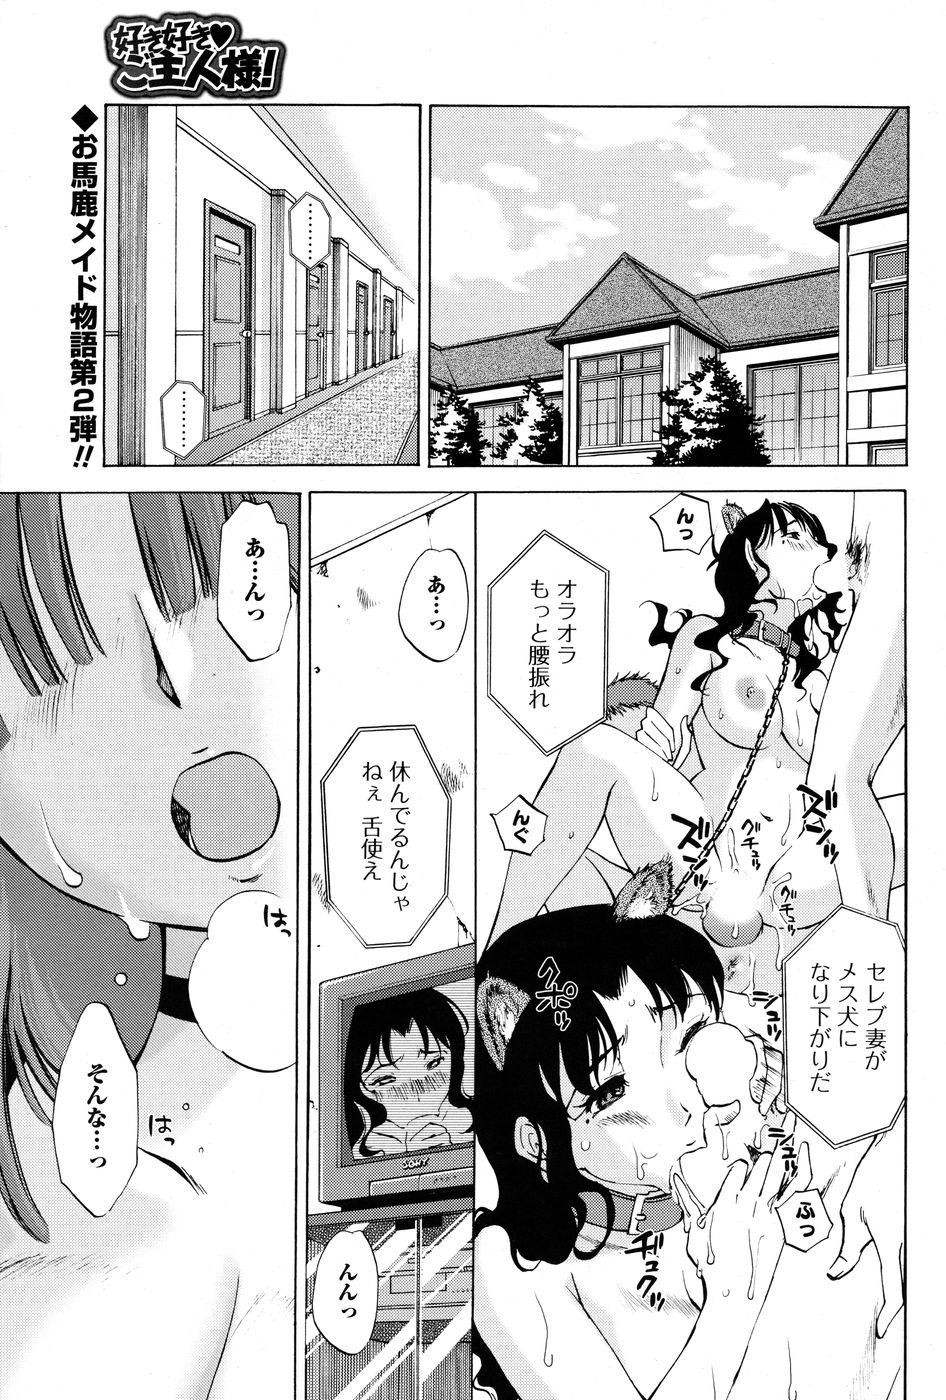 Men's Young Special Ikazuchi 2010-06 Vol. 14 page 50 full